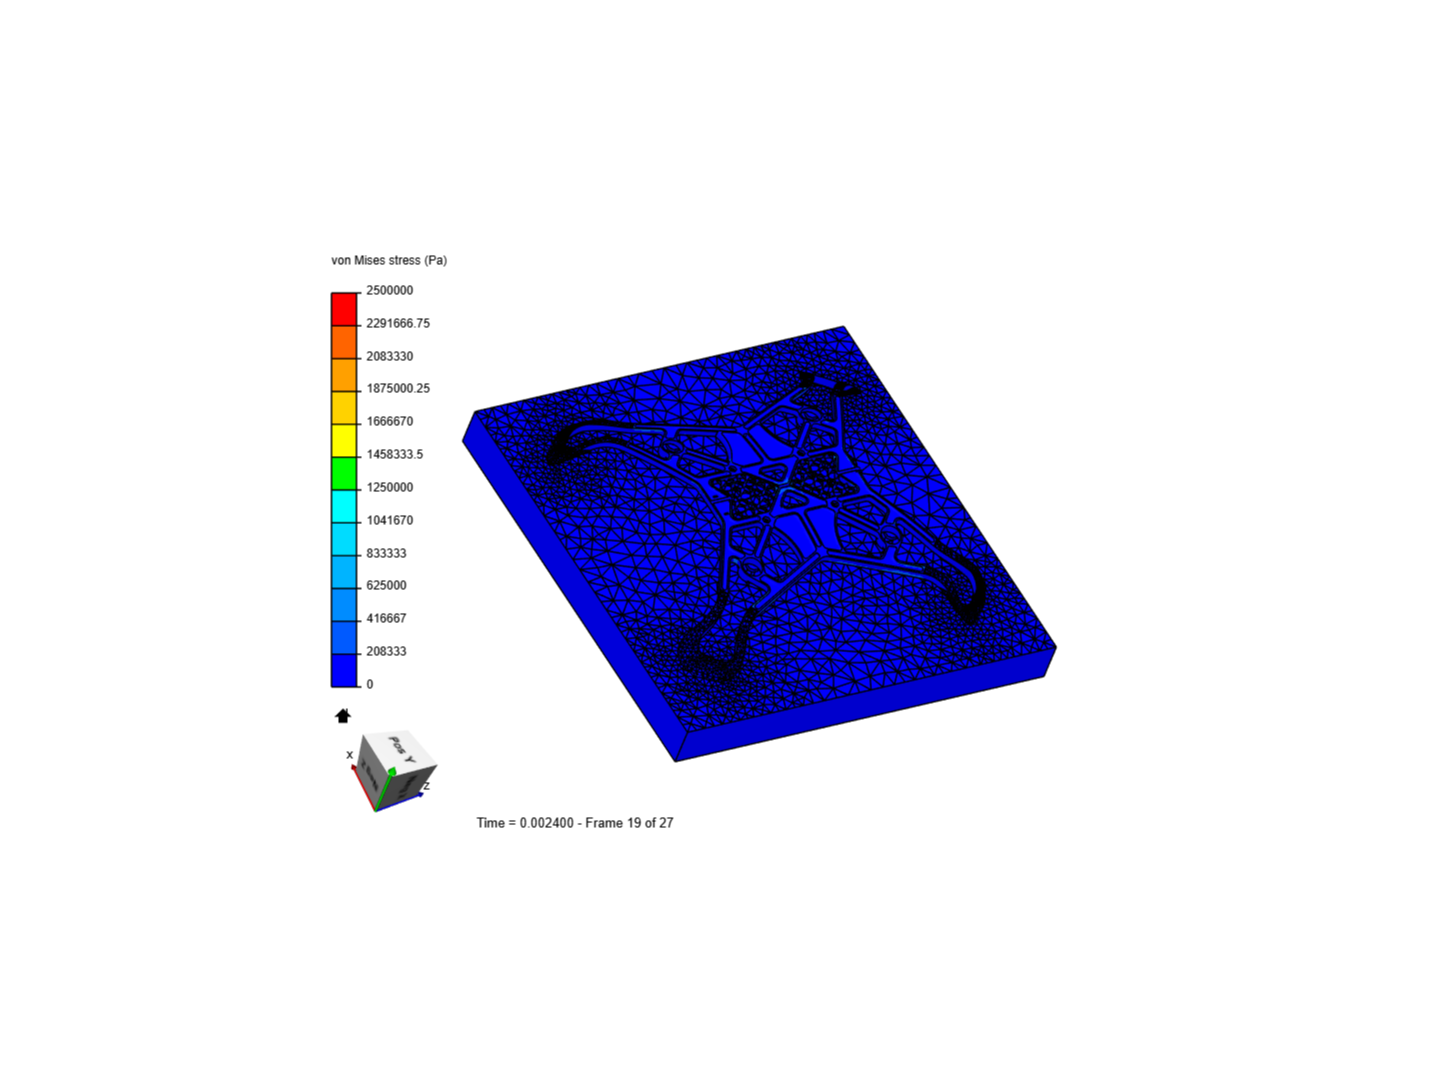 Dynamic analysis of quadcopter image